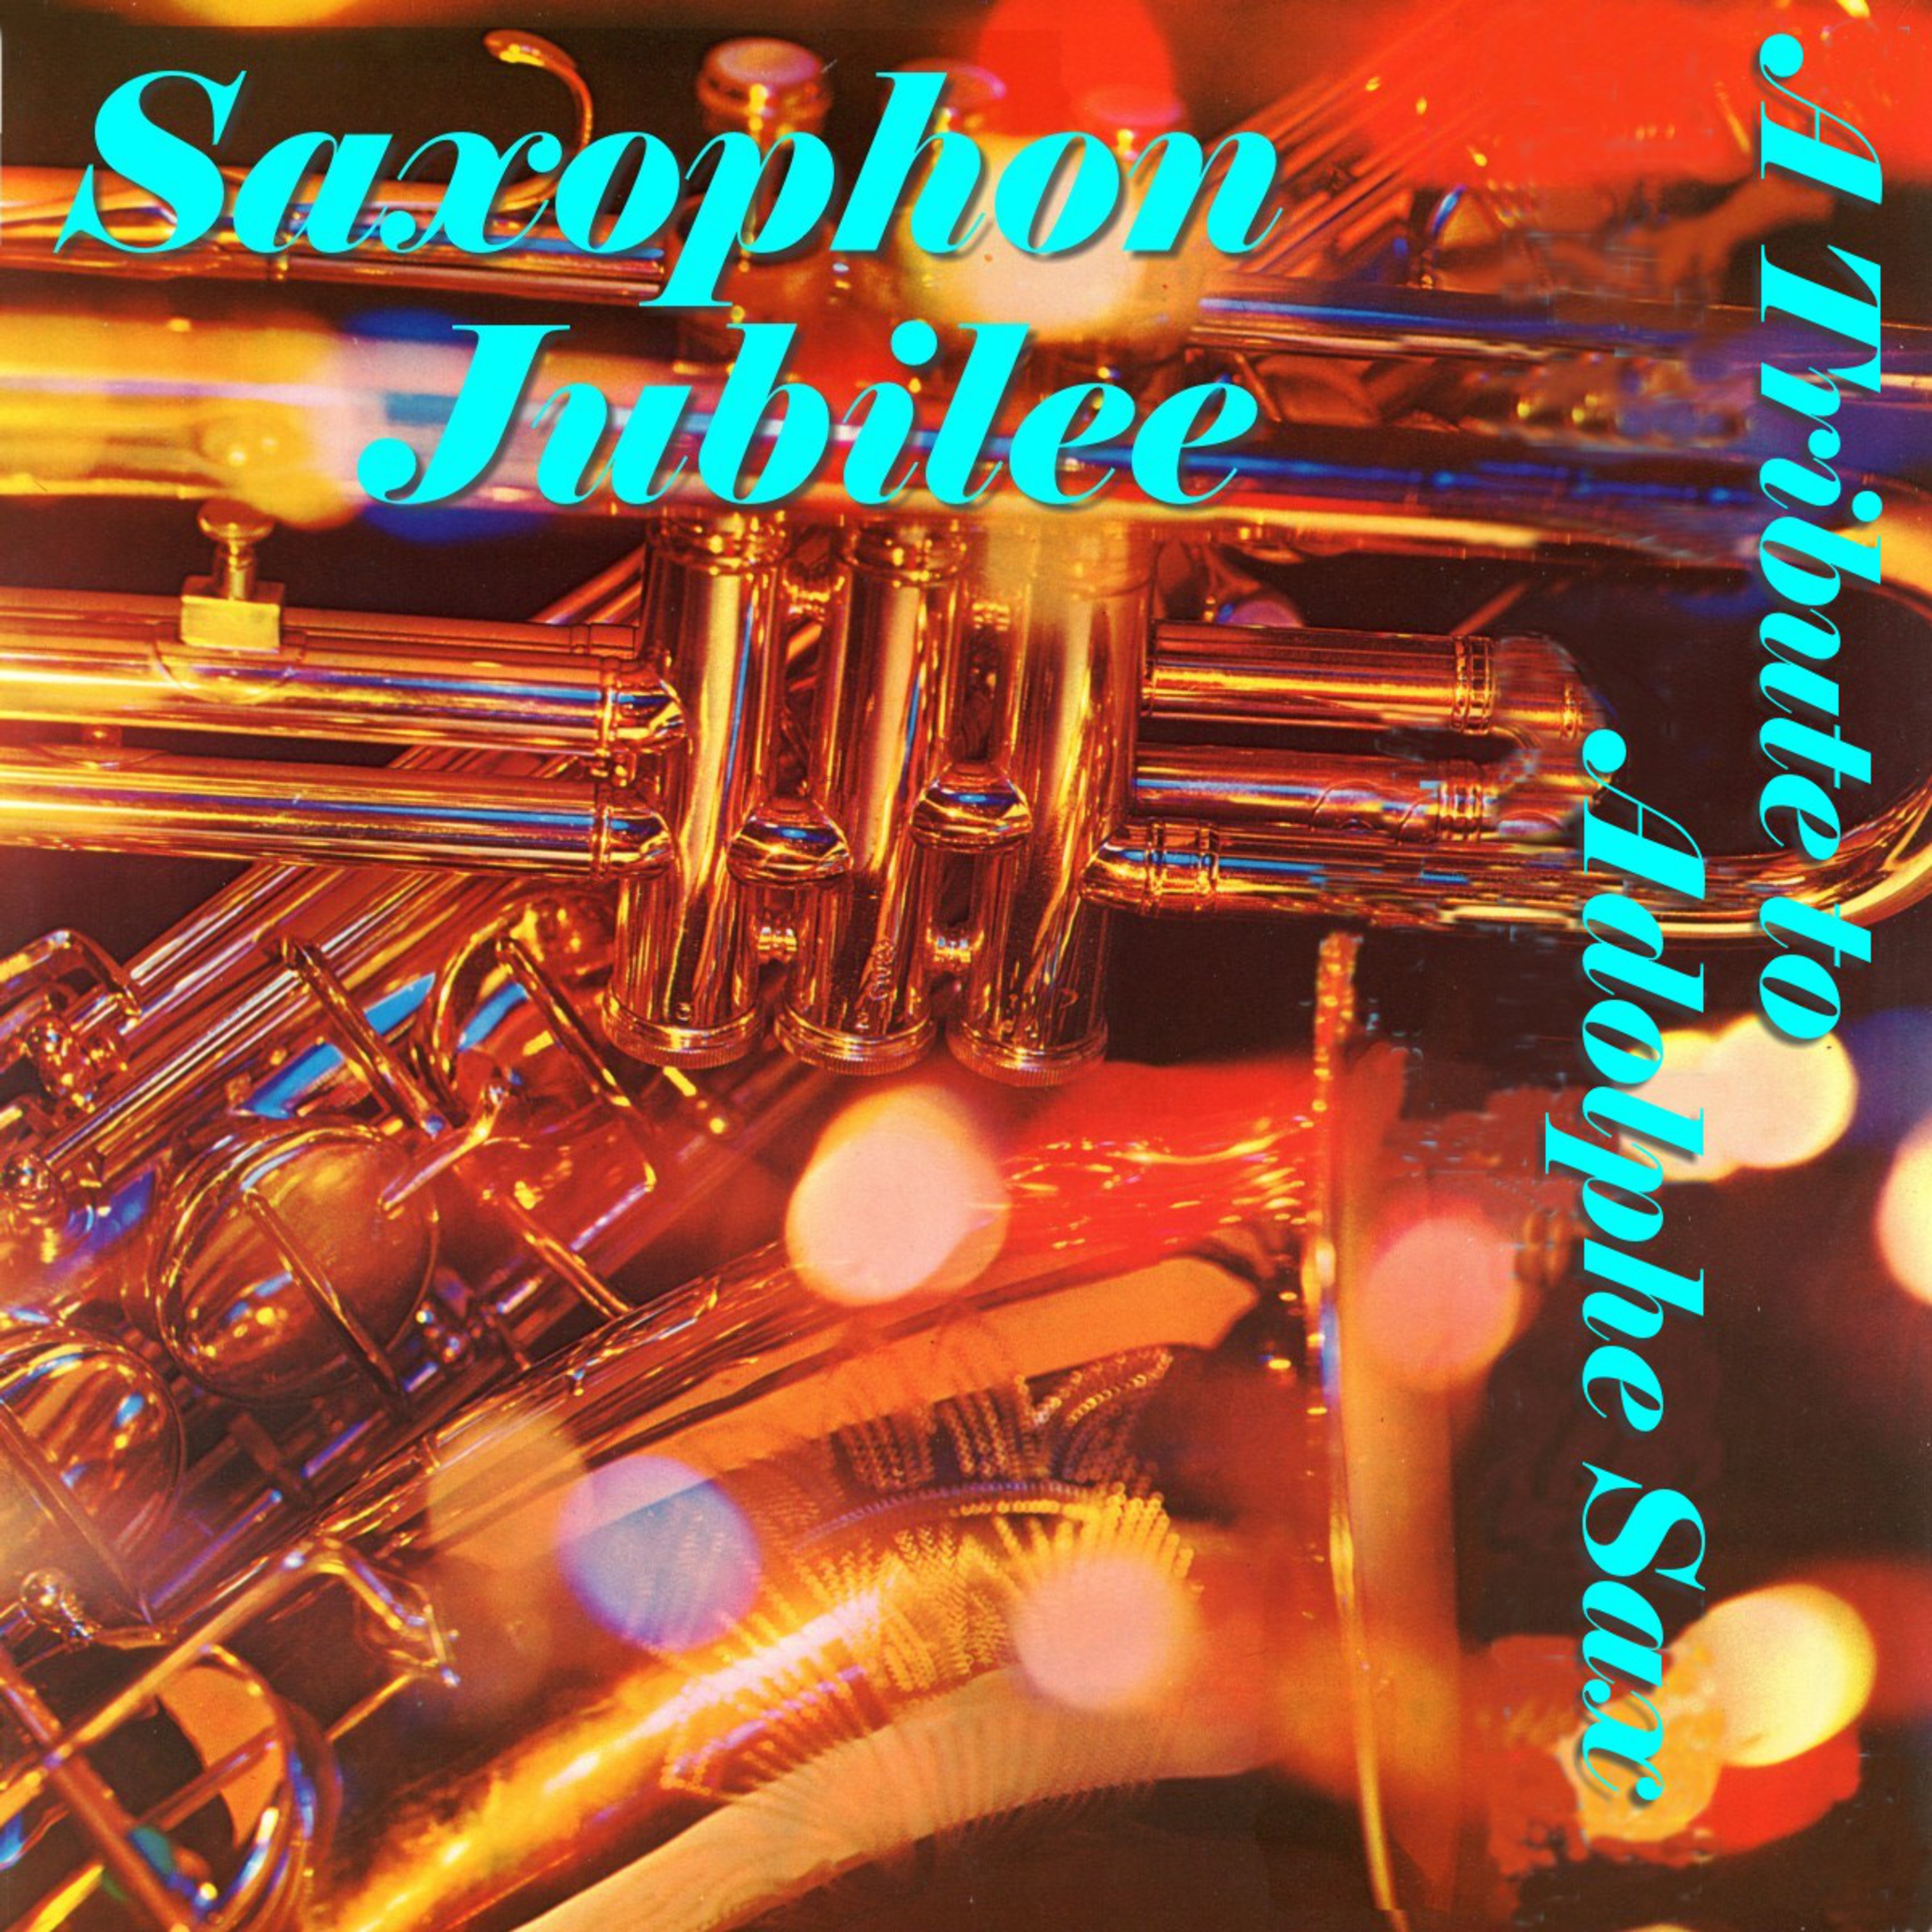 Saxophon Jubilee - A Tribute to Adolphe Sax